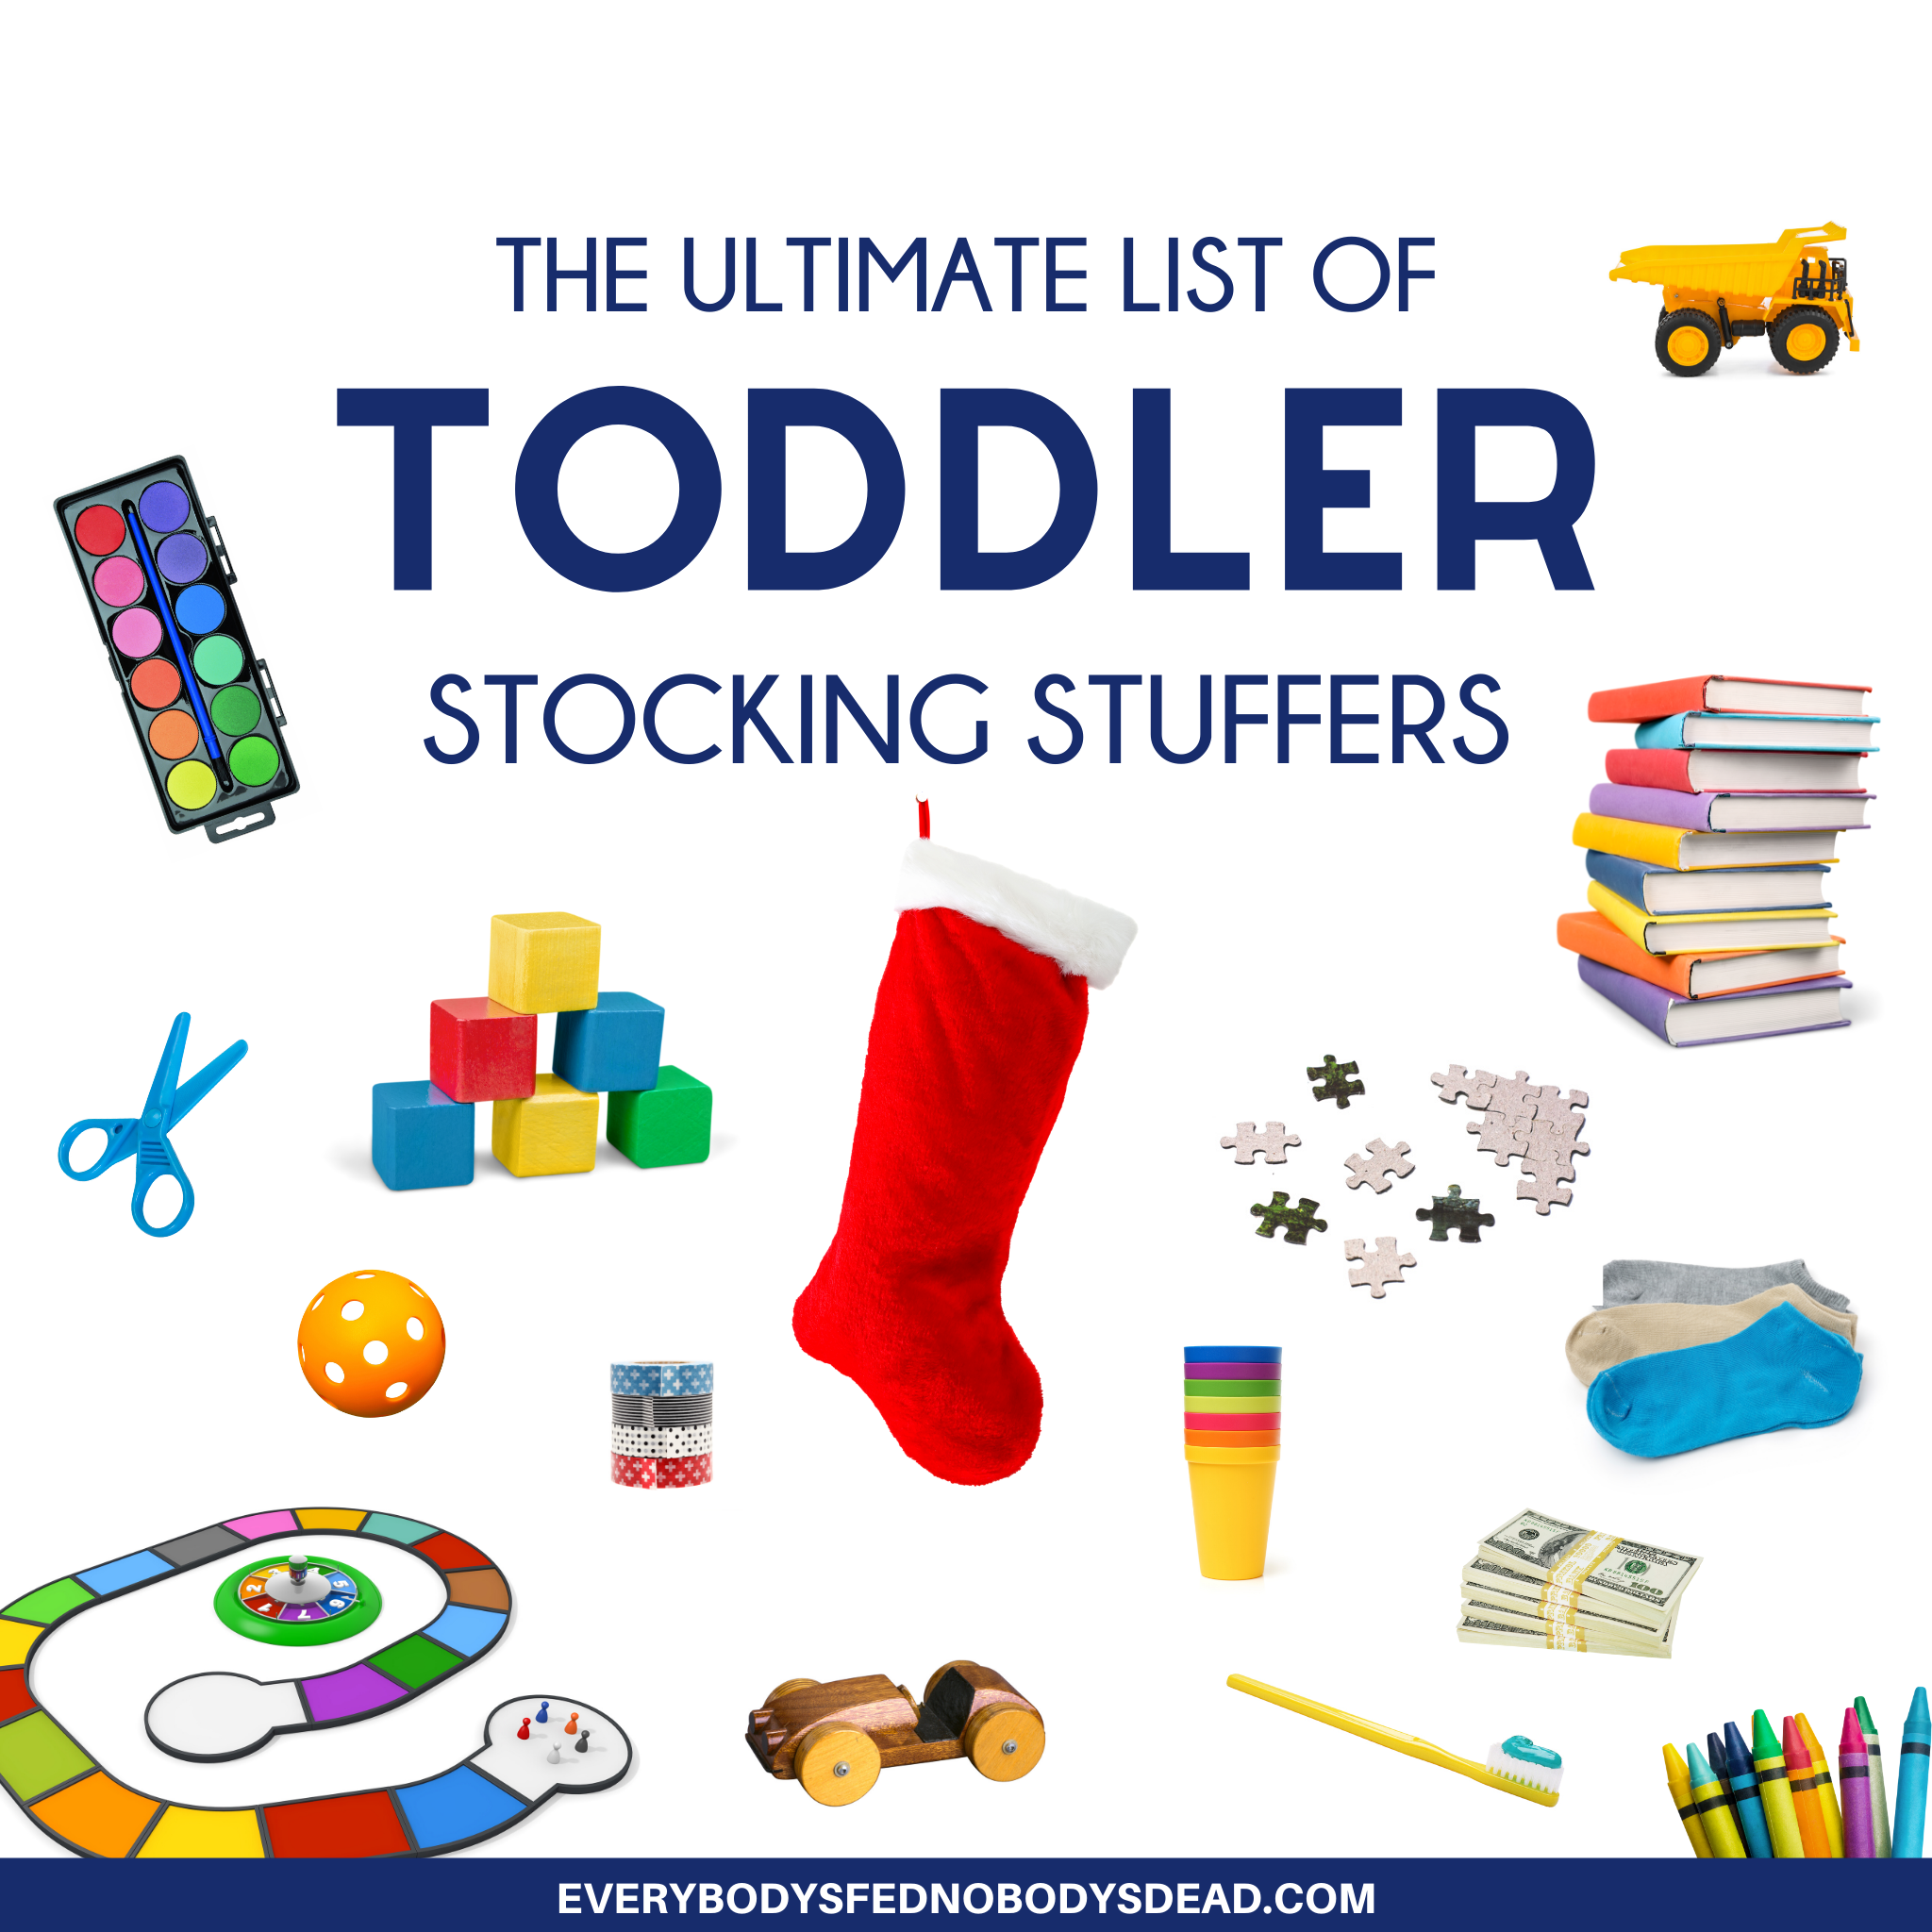 https://everybodysfednobodysdead.com/wp-content/uploads/2019/11/ultimate-stocking-stuffers-toddlers-square-image.png